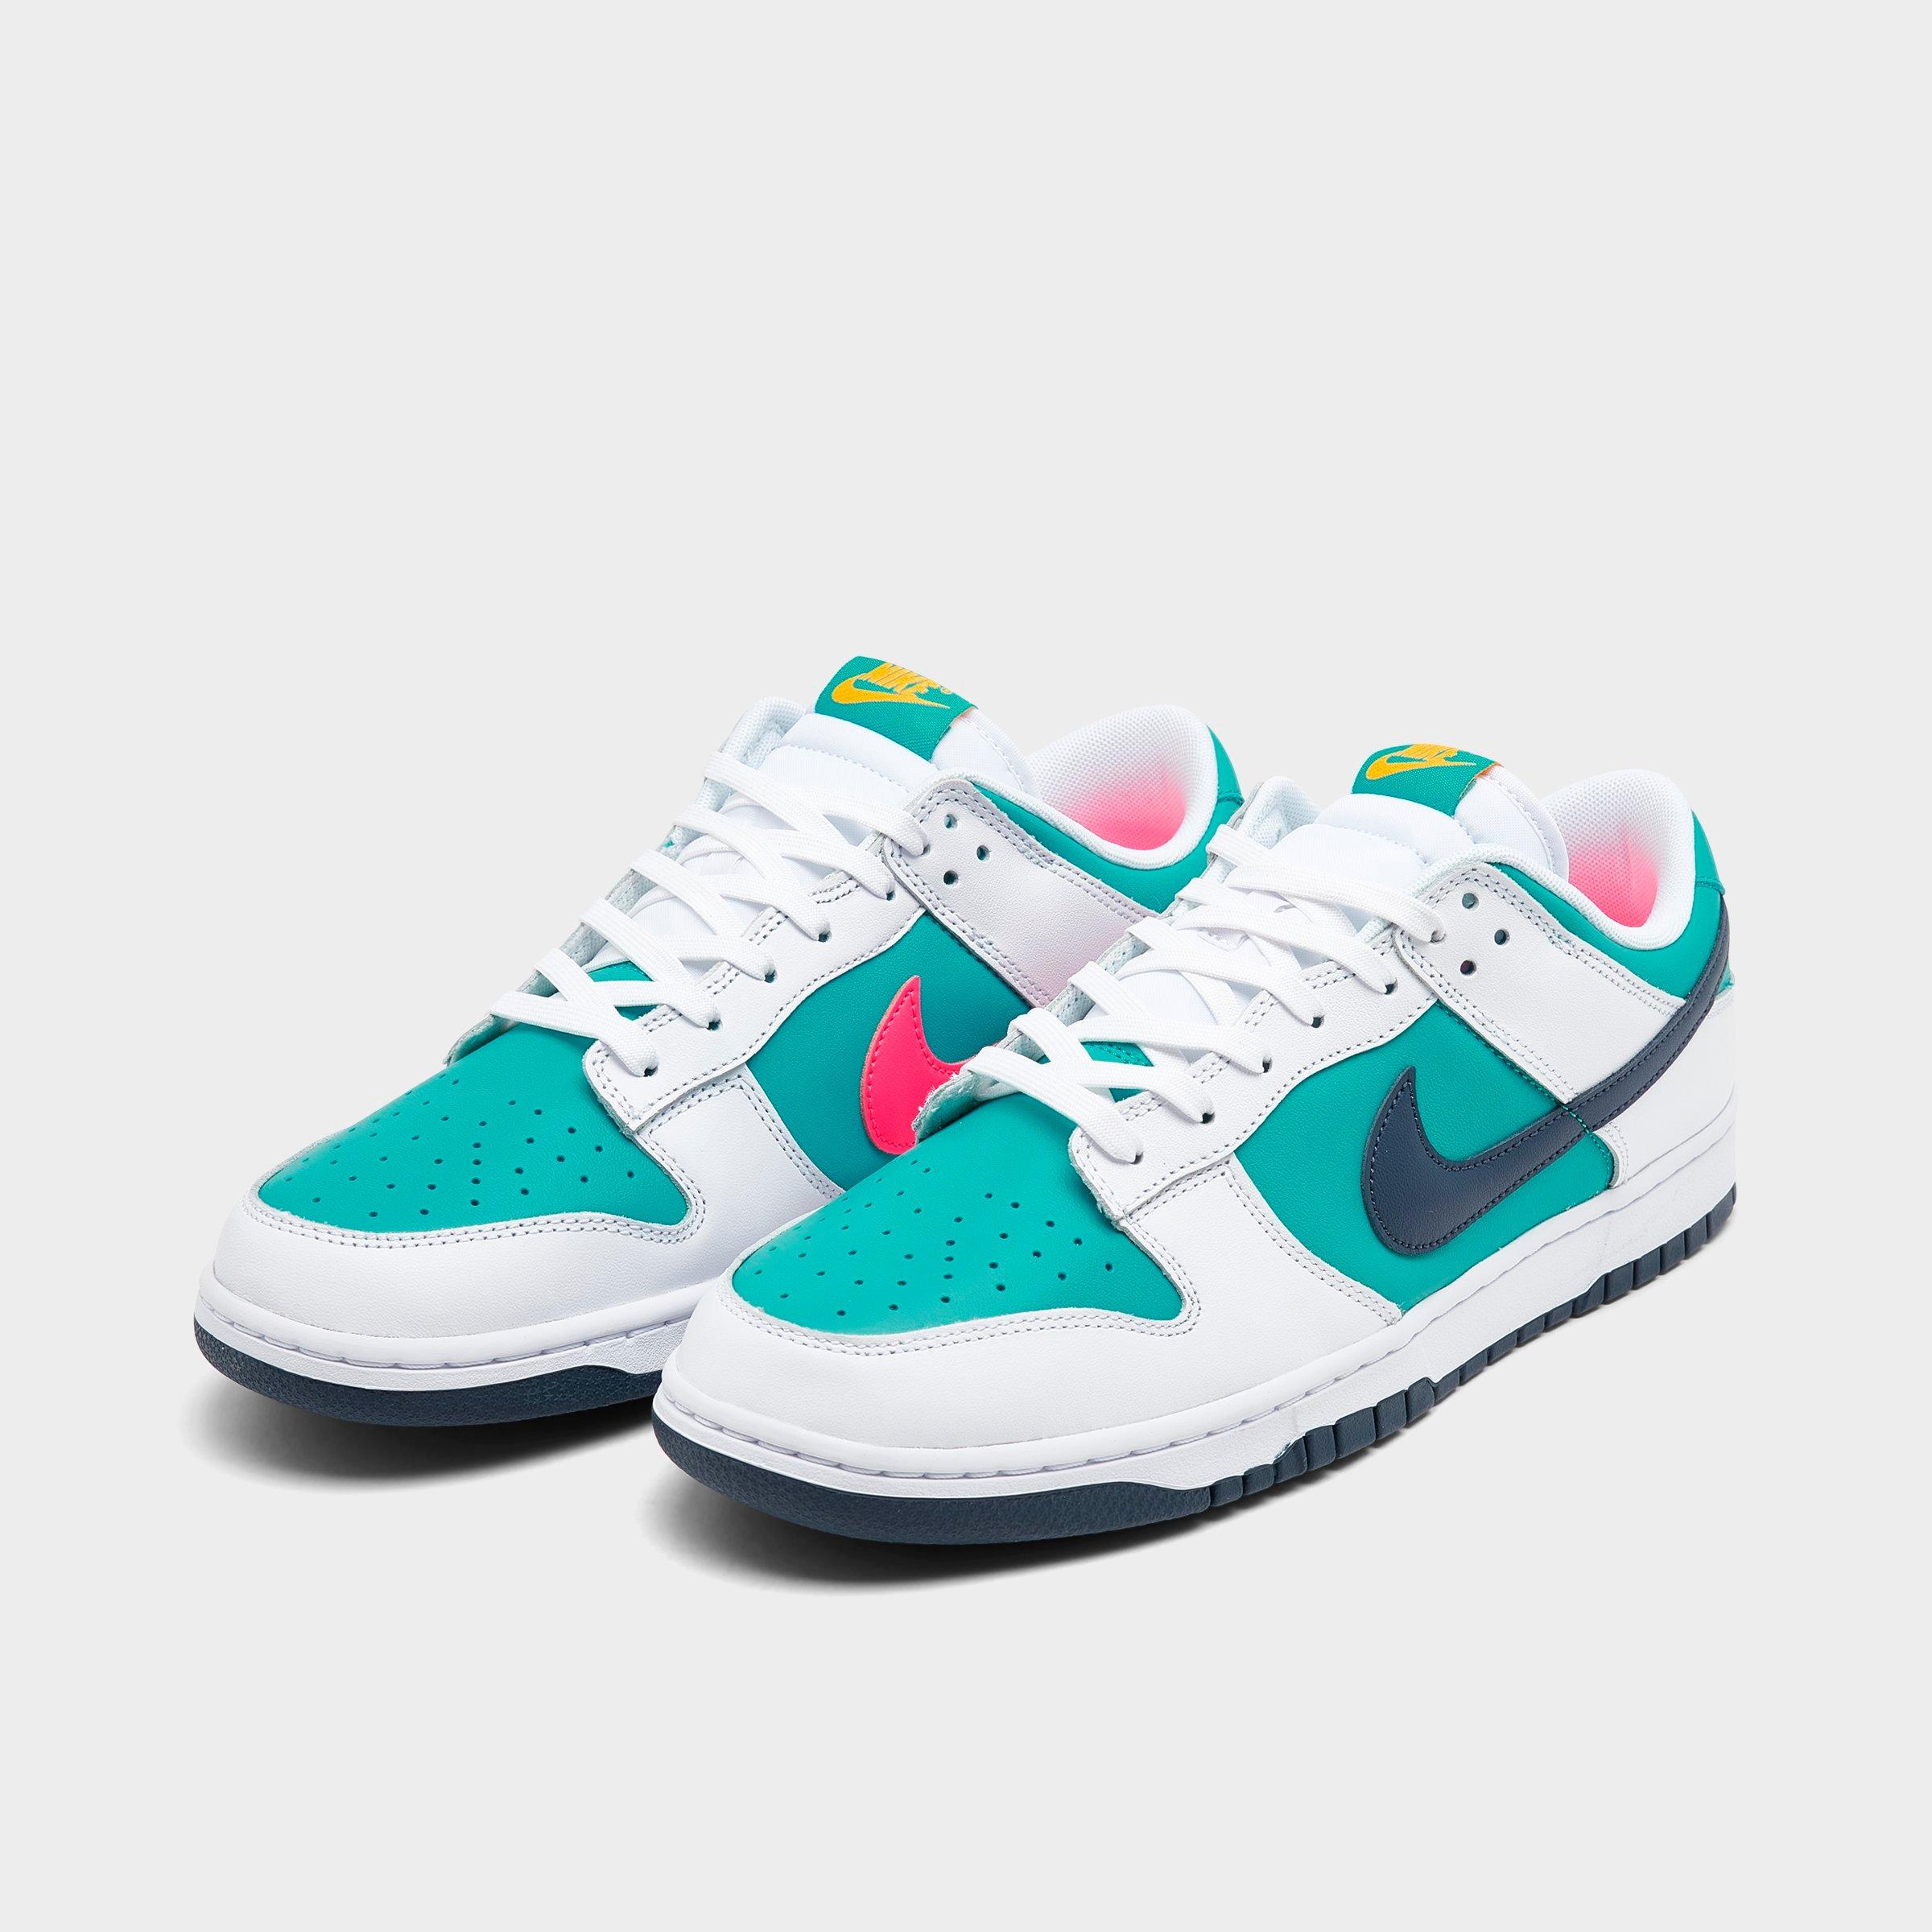 Nike Dunk Low Retro Casual Shoes (Men's Sizing) | Finish Line